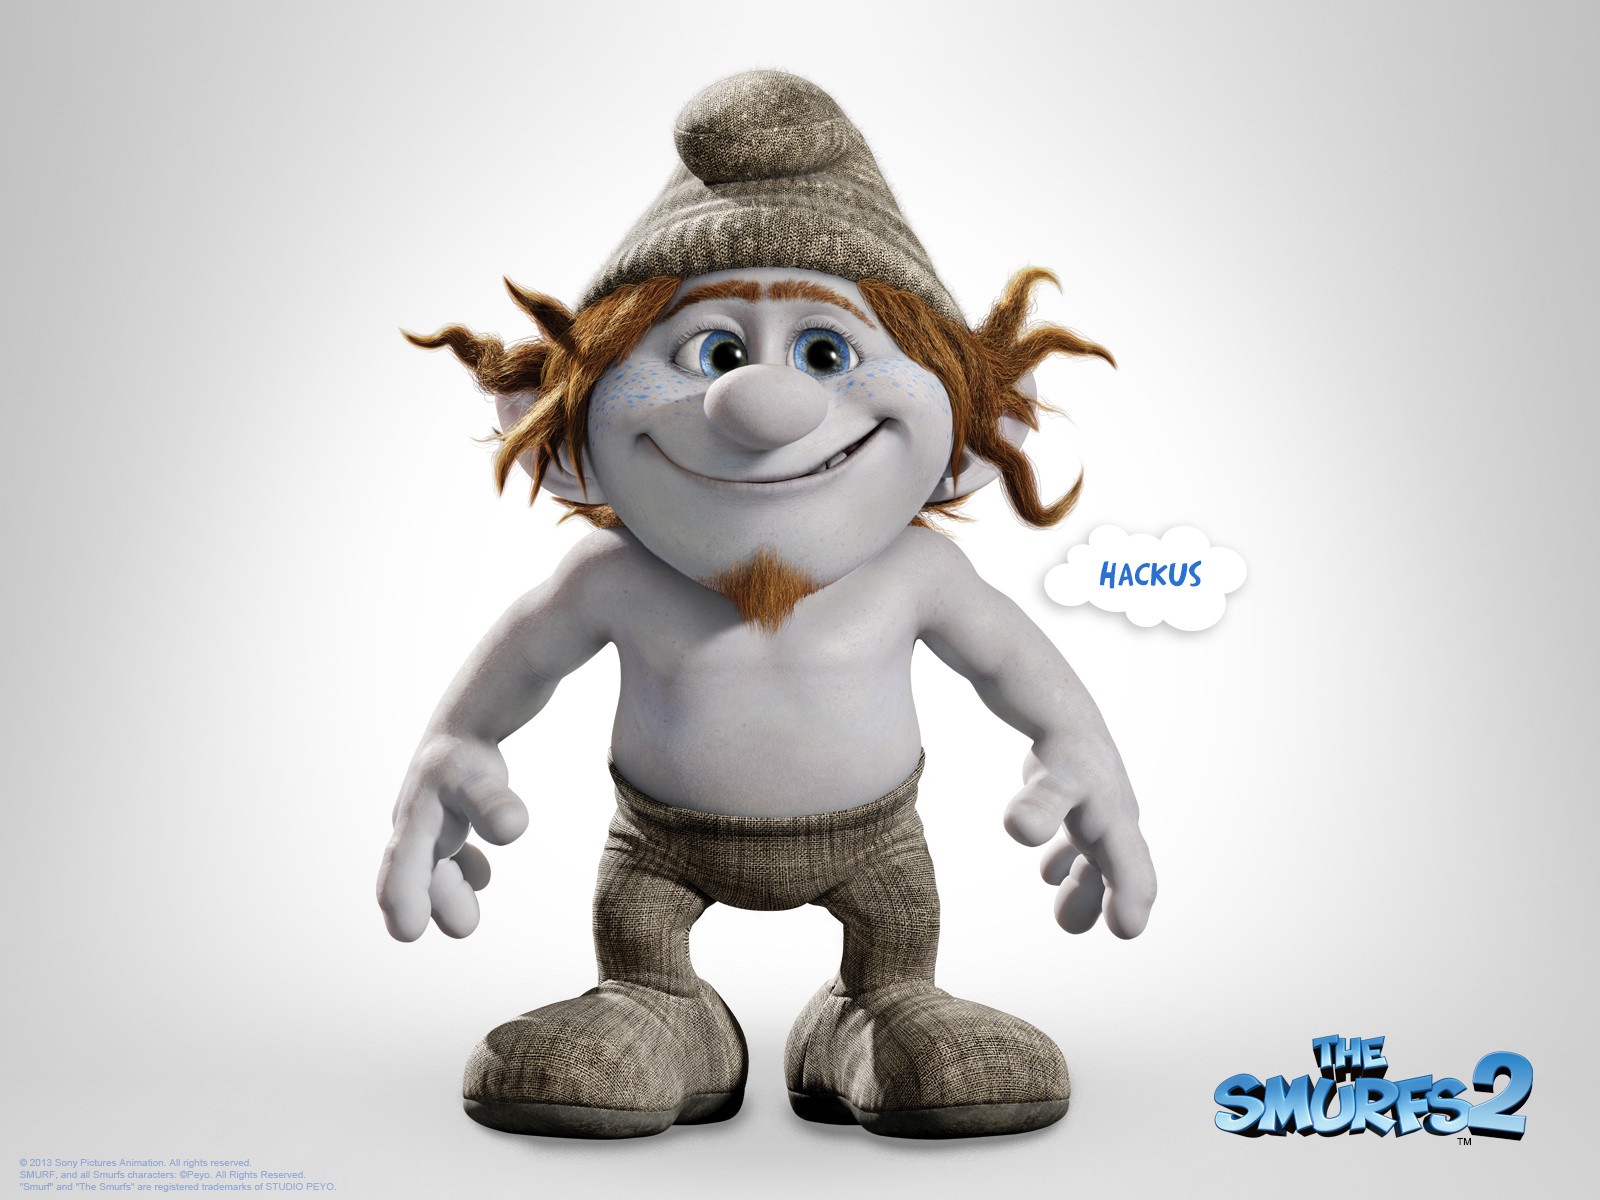 The Smurfs 2 HD movie wallpapers #9 - 1600x1200